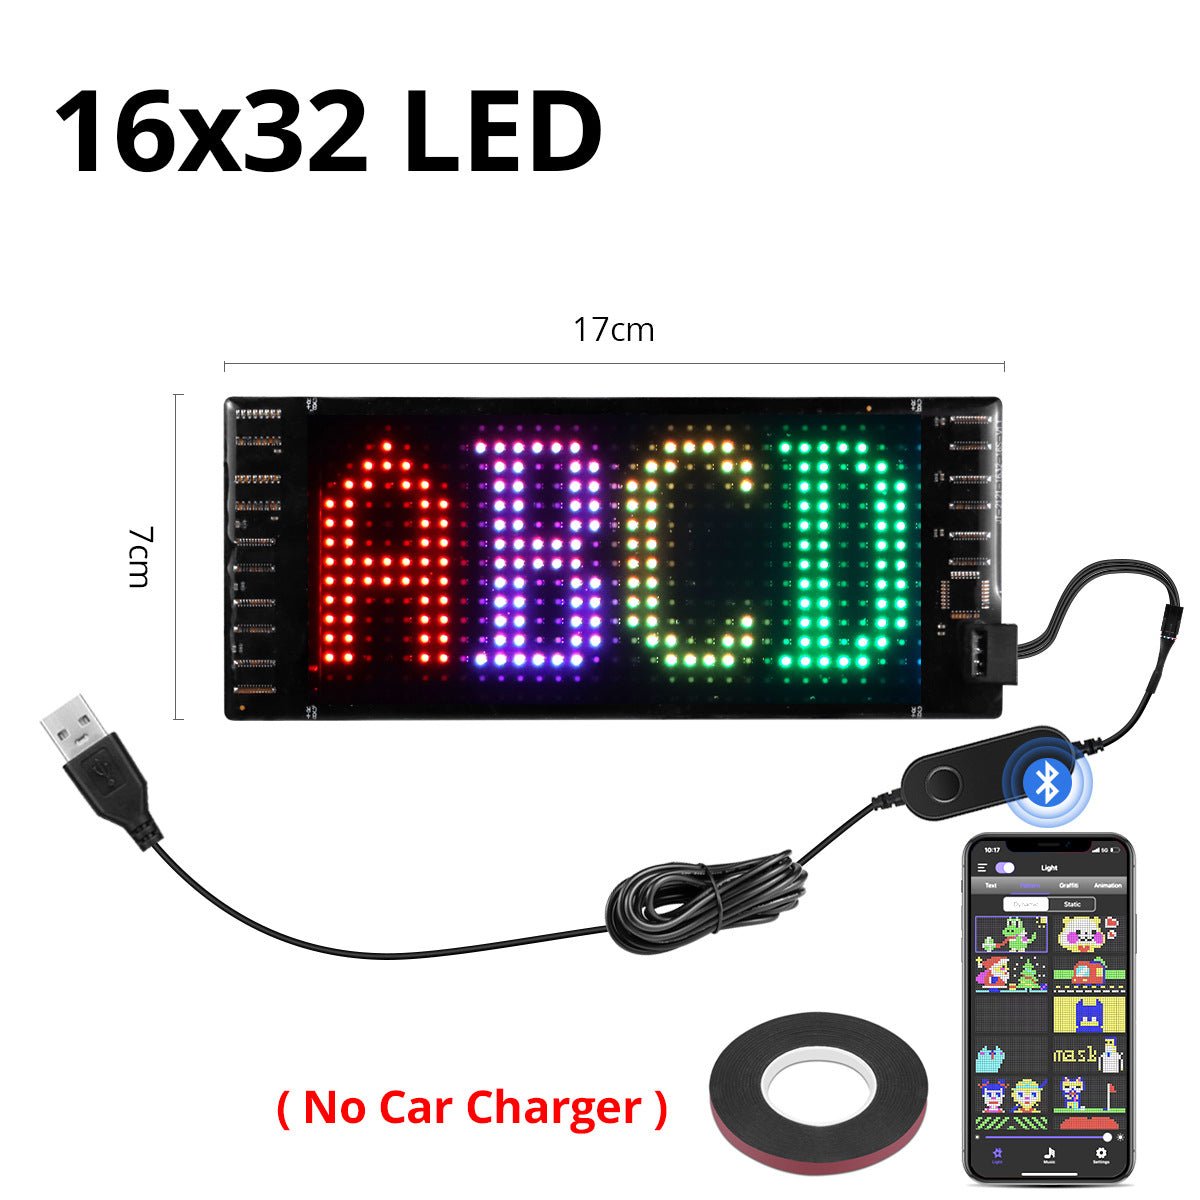 Cell Phone- USB Programmable LED Pixel Matrix Soft Screen LED Customizable Sign!!! Controlled right from your Cell Phone- USB Pr J&E Discount Store 